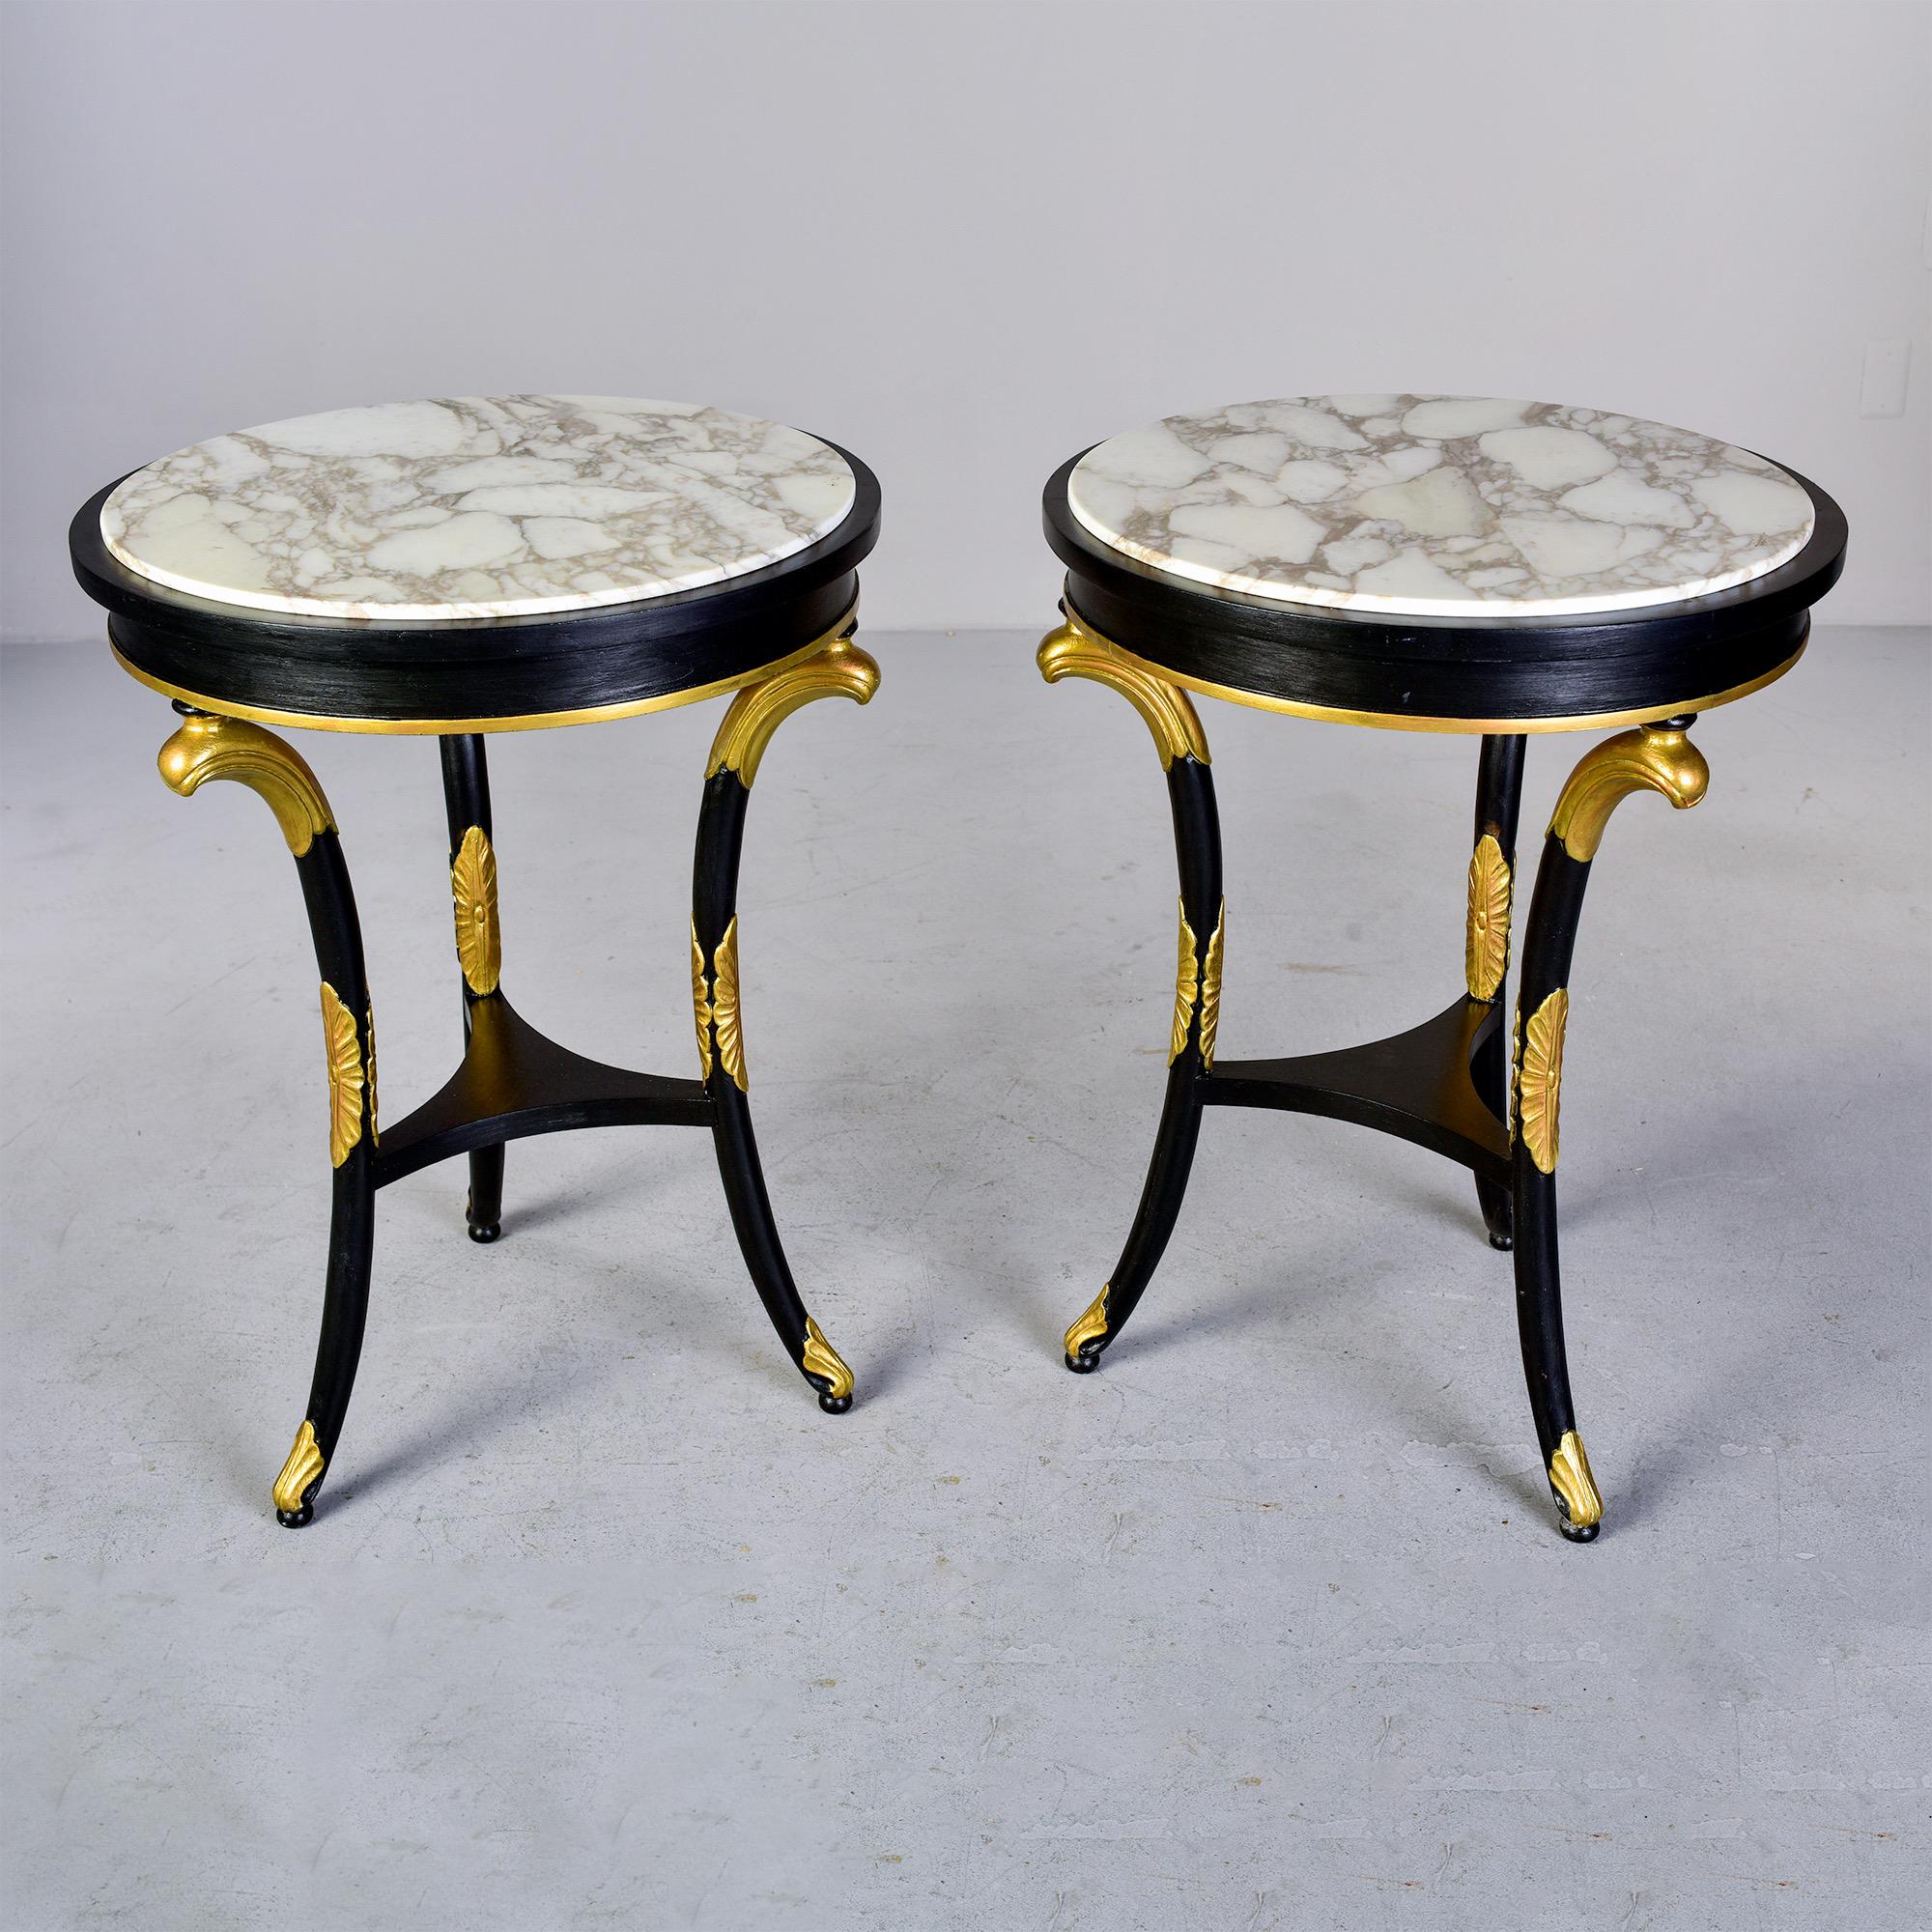 Circa 1880s pair of English side tables feature three legged ebonised base with giltwood fittings and round inset marble tops. Unknown maker. Sold and priced as a pair.